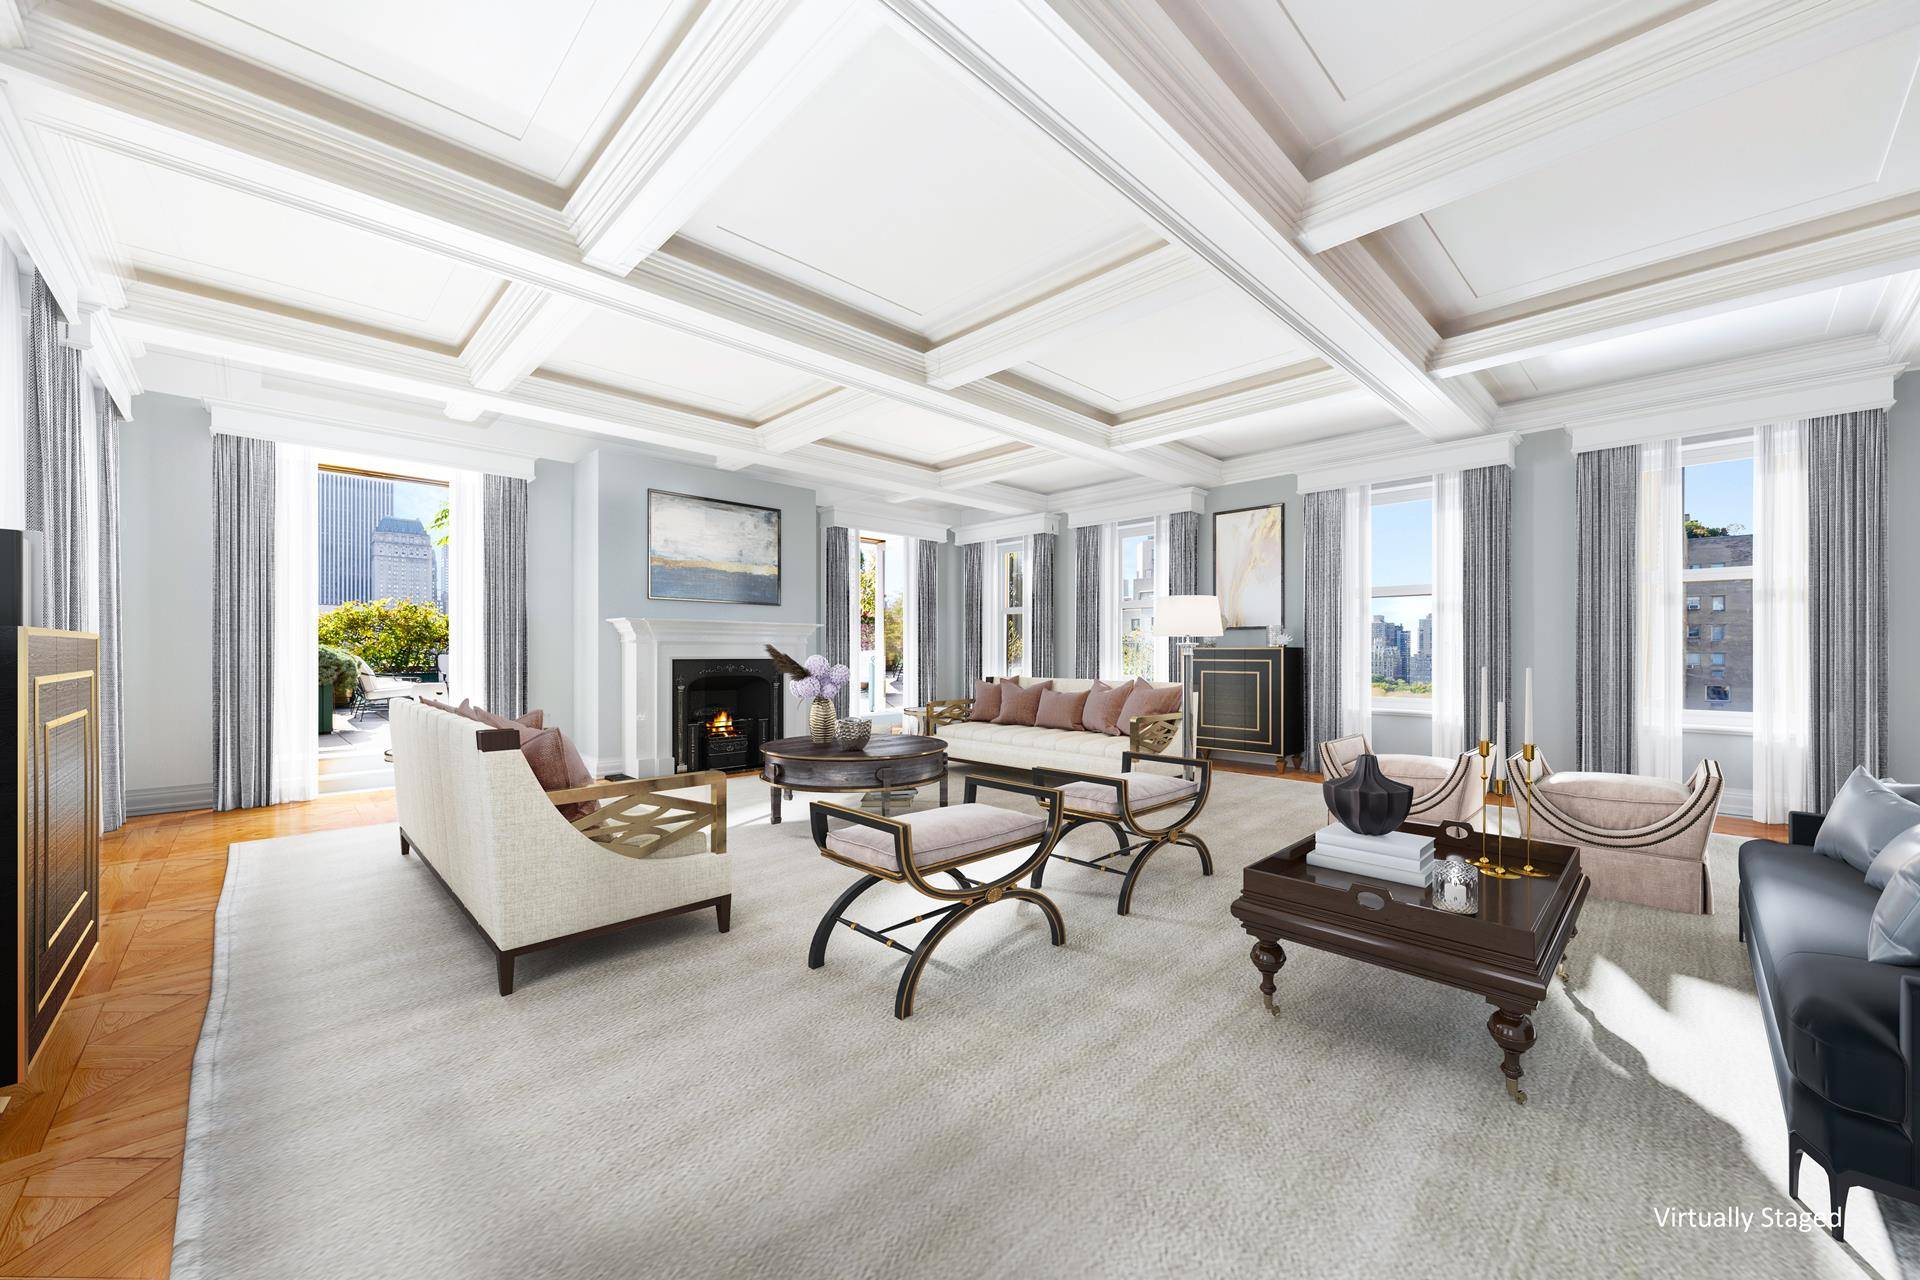 Located at the corner of East 69th Street and Madison Avenue in the former Westbury Hotel, this magnificent two story penthouse offers panoramic views overlooking the New York skyline and ...